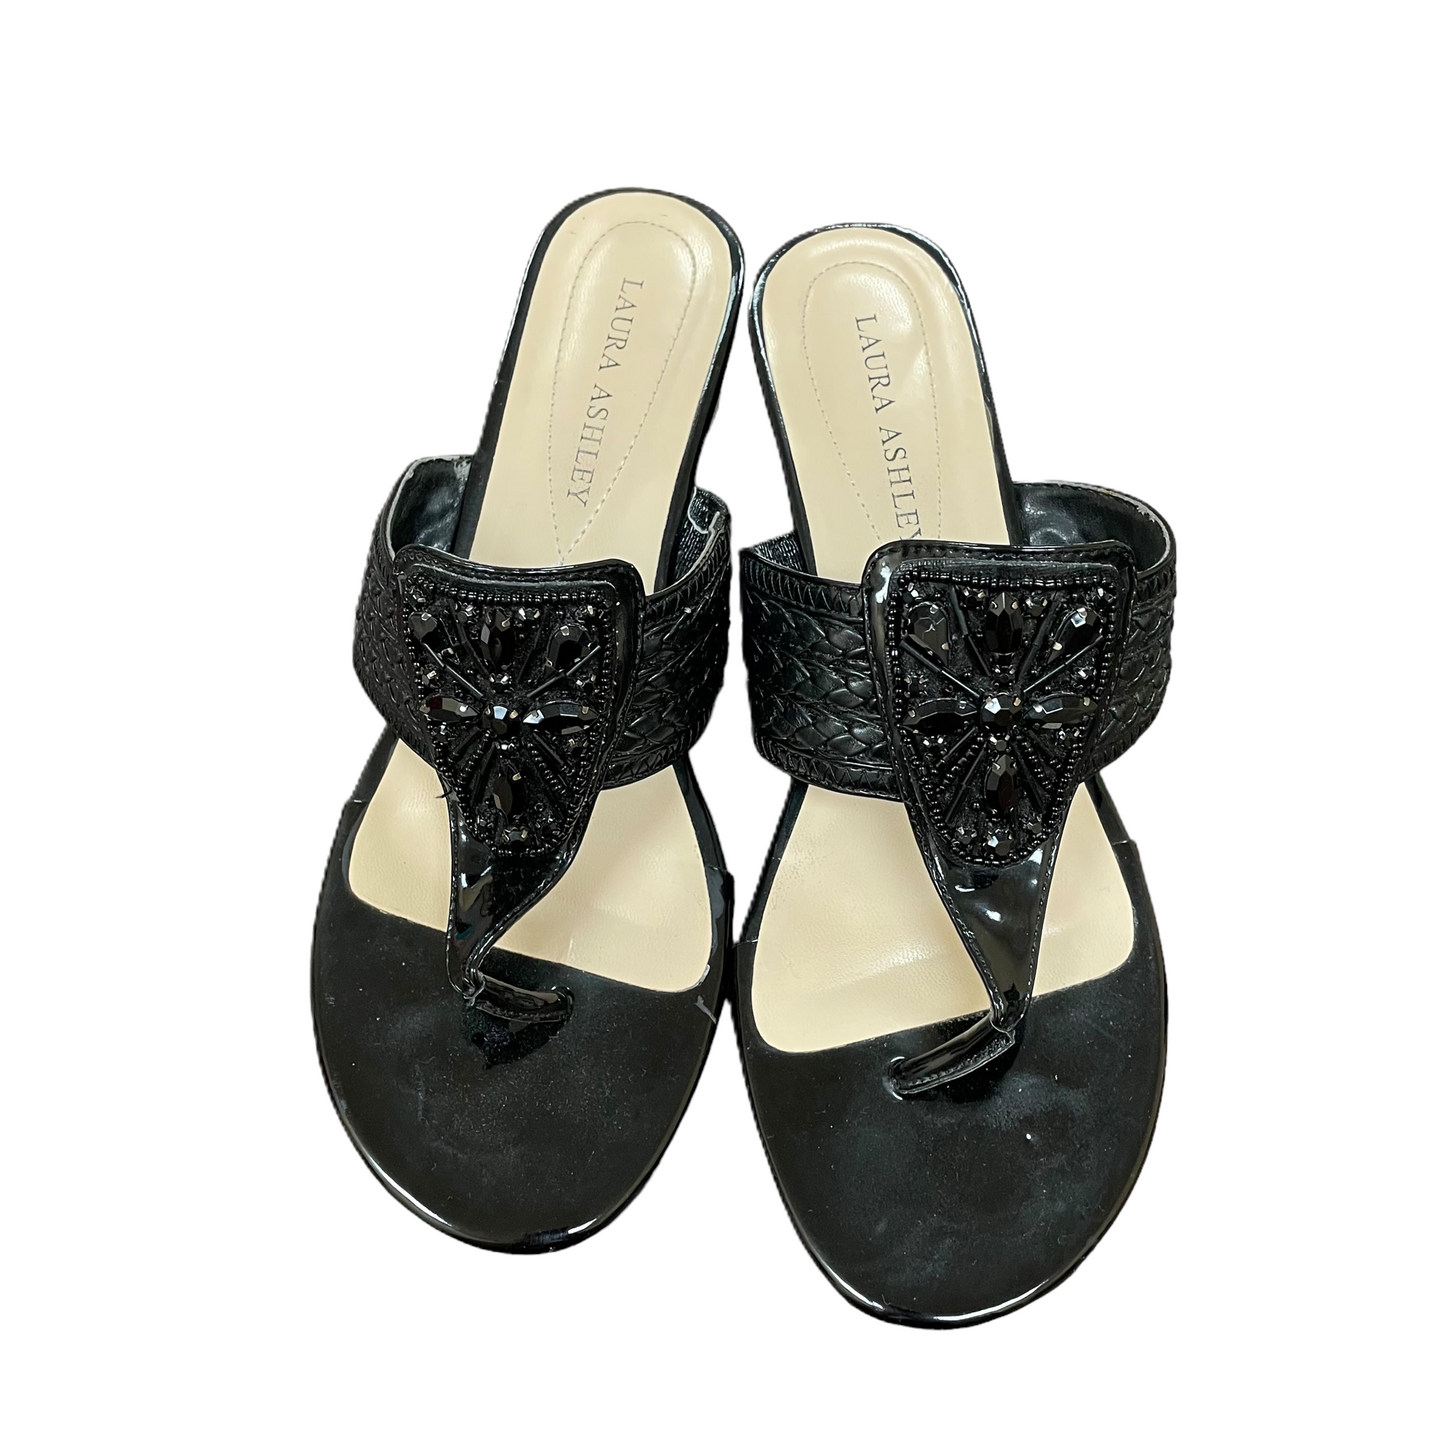 Black Shoes Flats By Laura Ashley, Size: 8.5